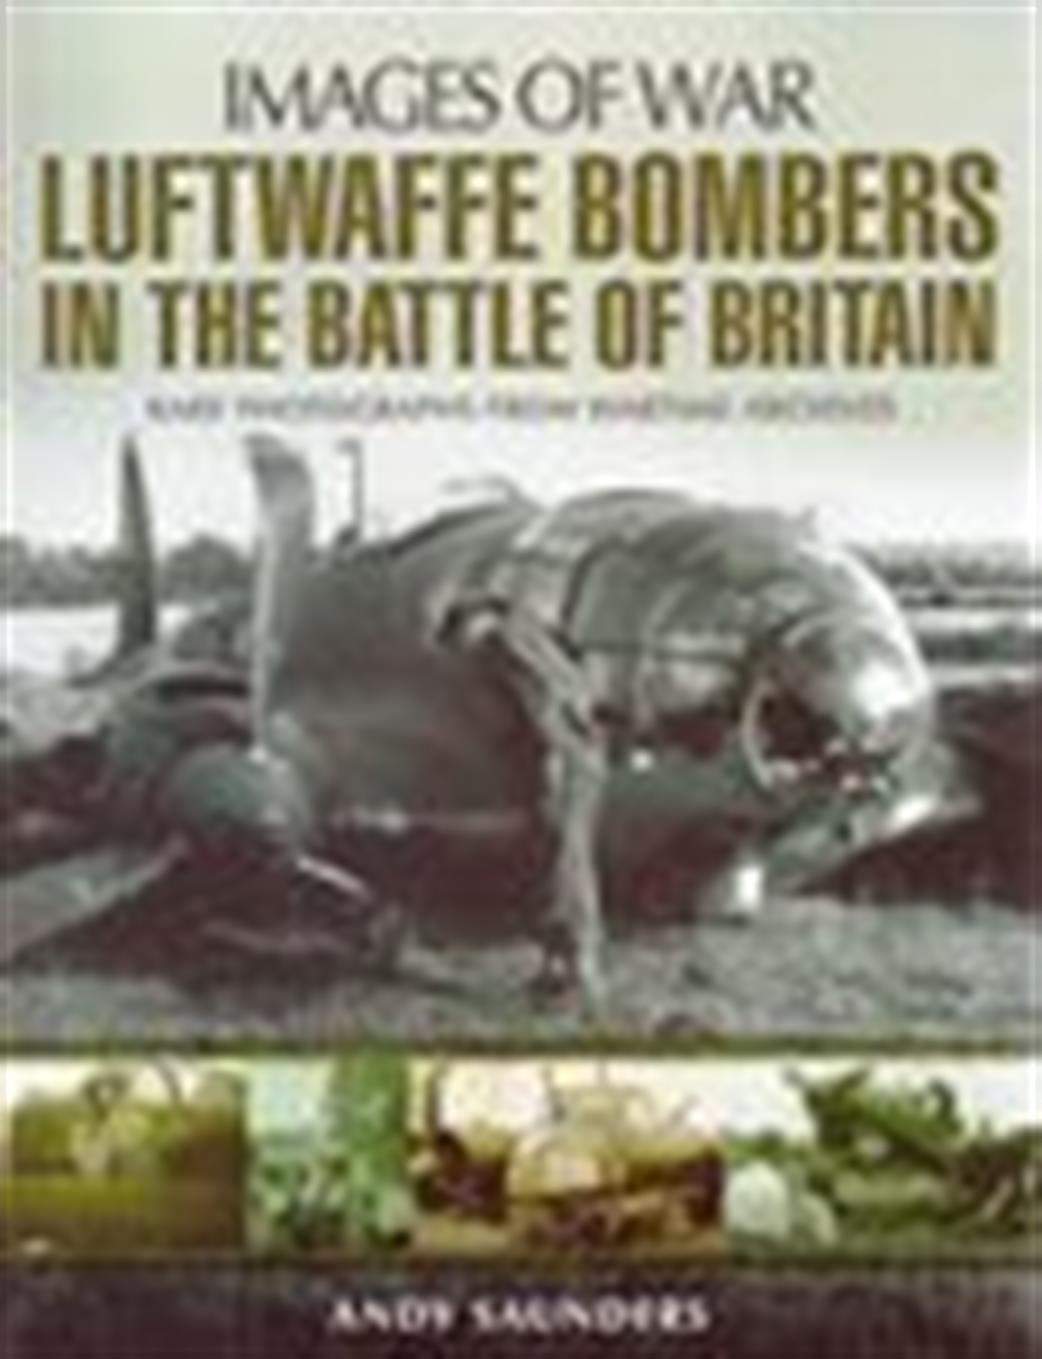 Pen & Sword 9781783030248 Images of War: Luftwaffe Bombers in the Battle of Britain by Andy Saunders